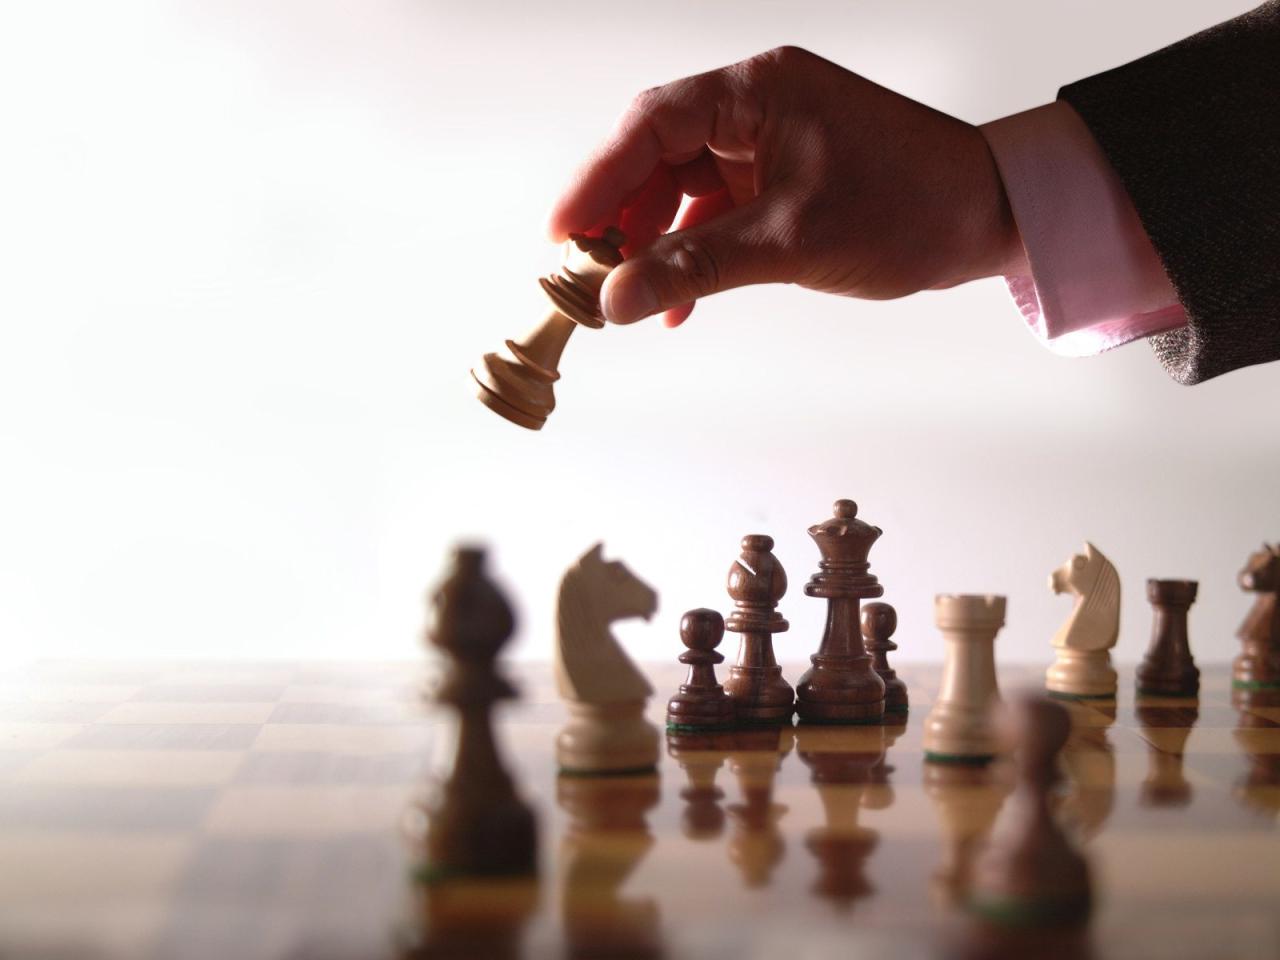 Azerbaijan is country with rich chess history